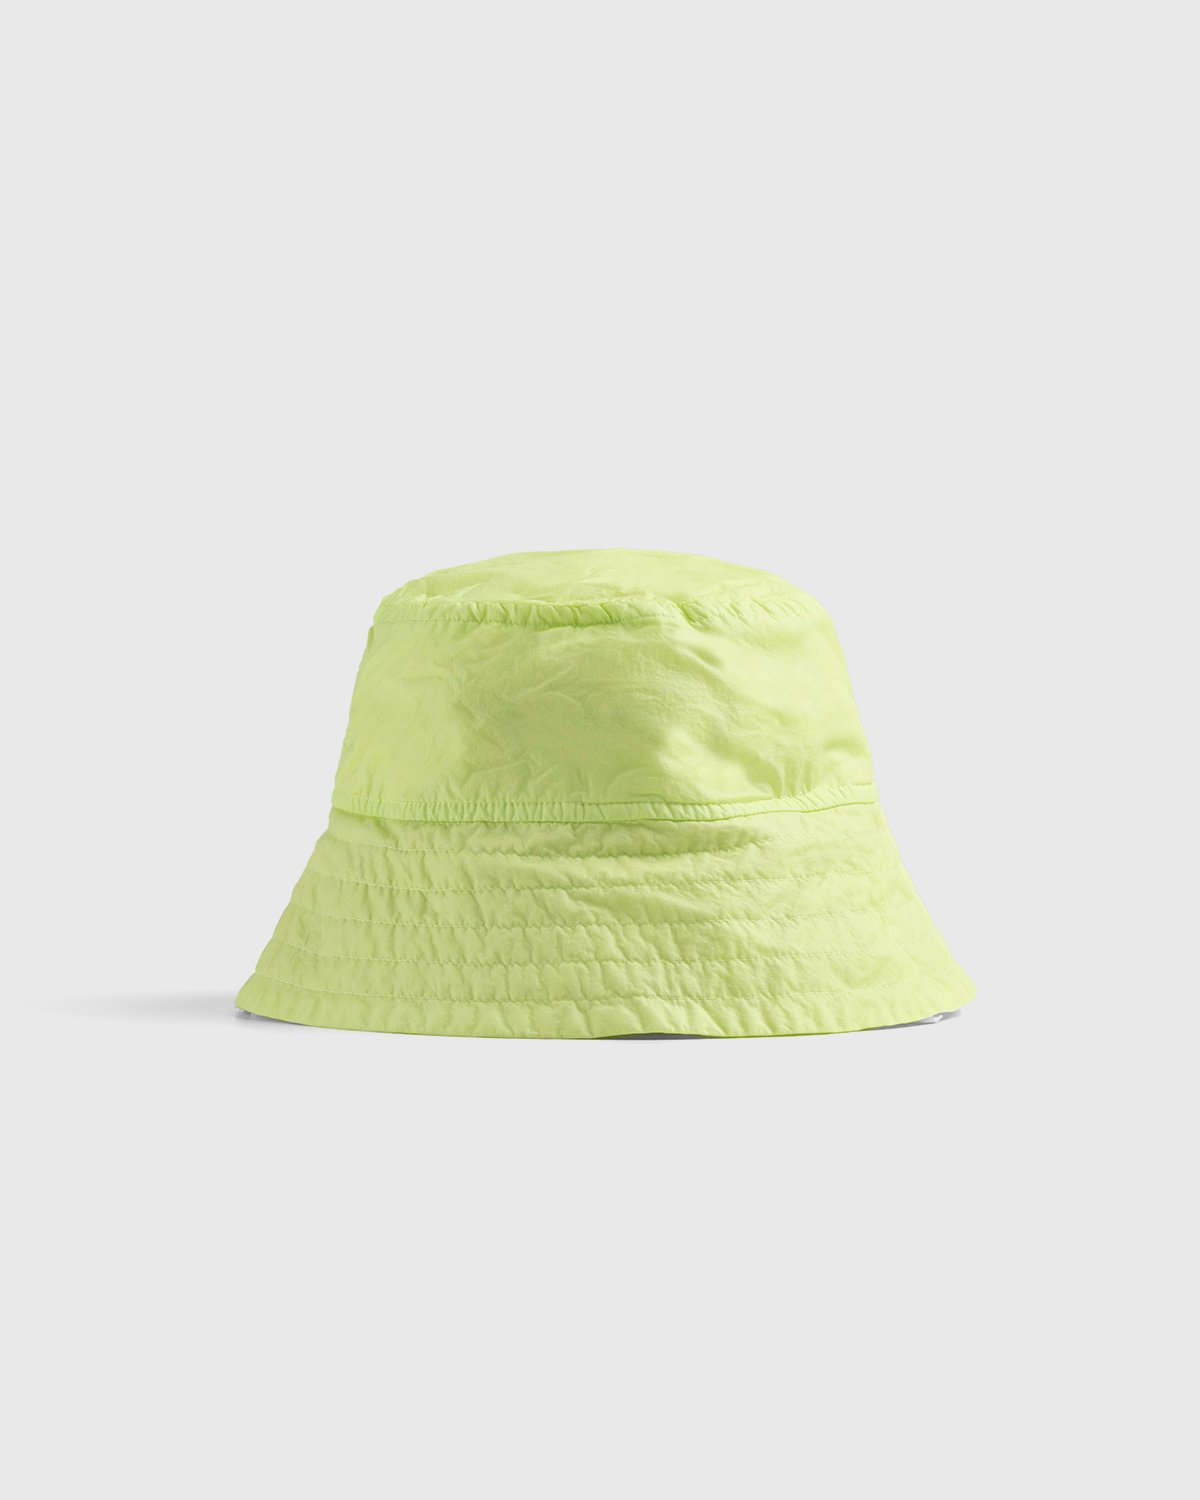 Dries van Noten - Gilly Hat Lime - Accessories - Yellow - Image 2